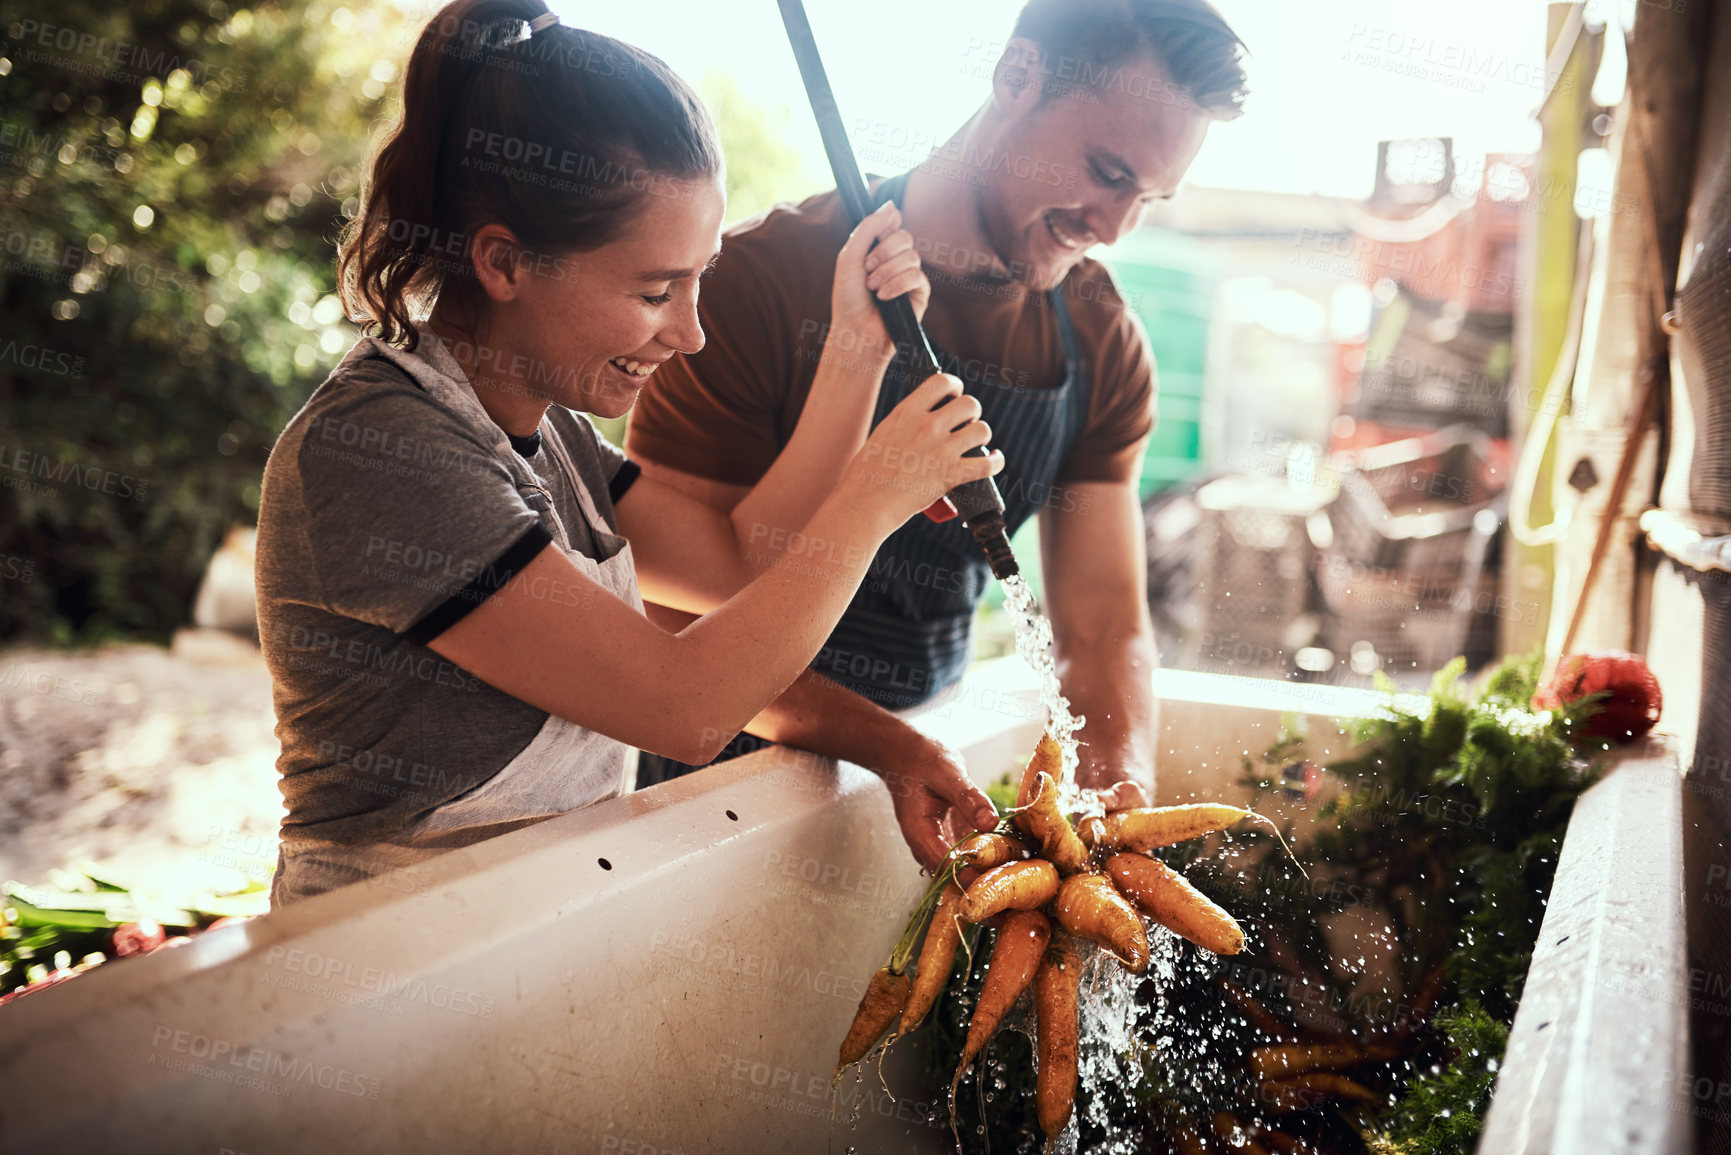 Buy stock photo Shot of a happy young couple cleaning and preparing a bunch of freshly picked carrots at their farm